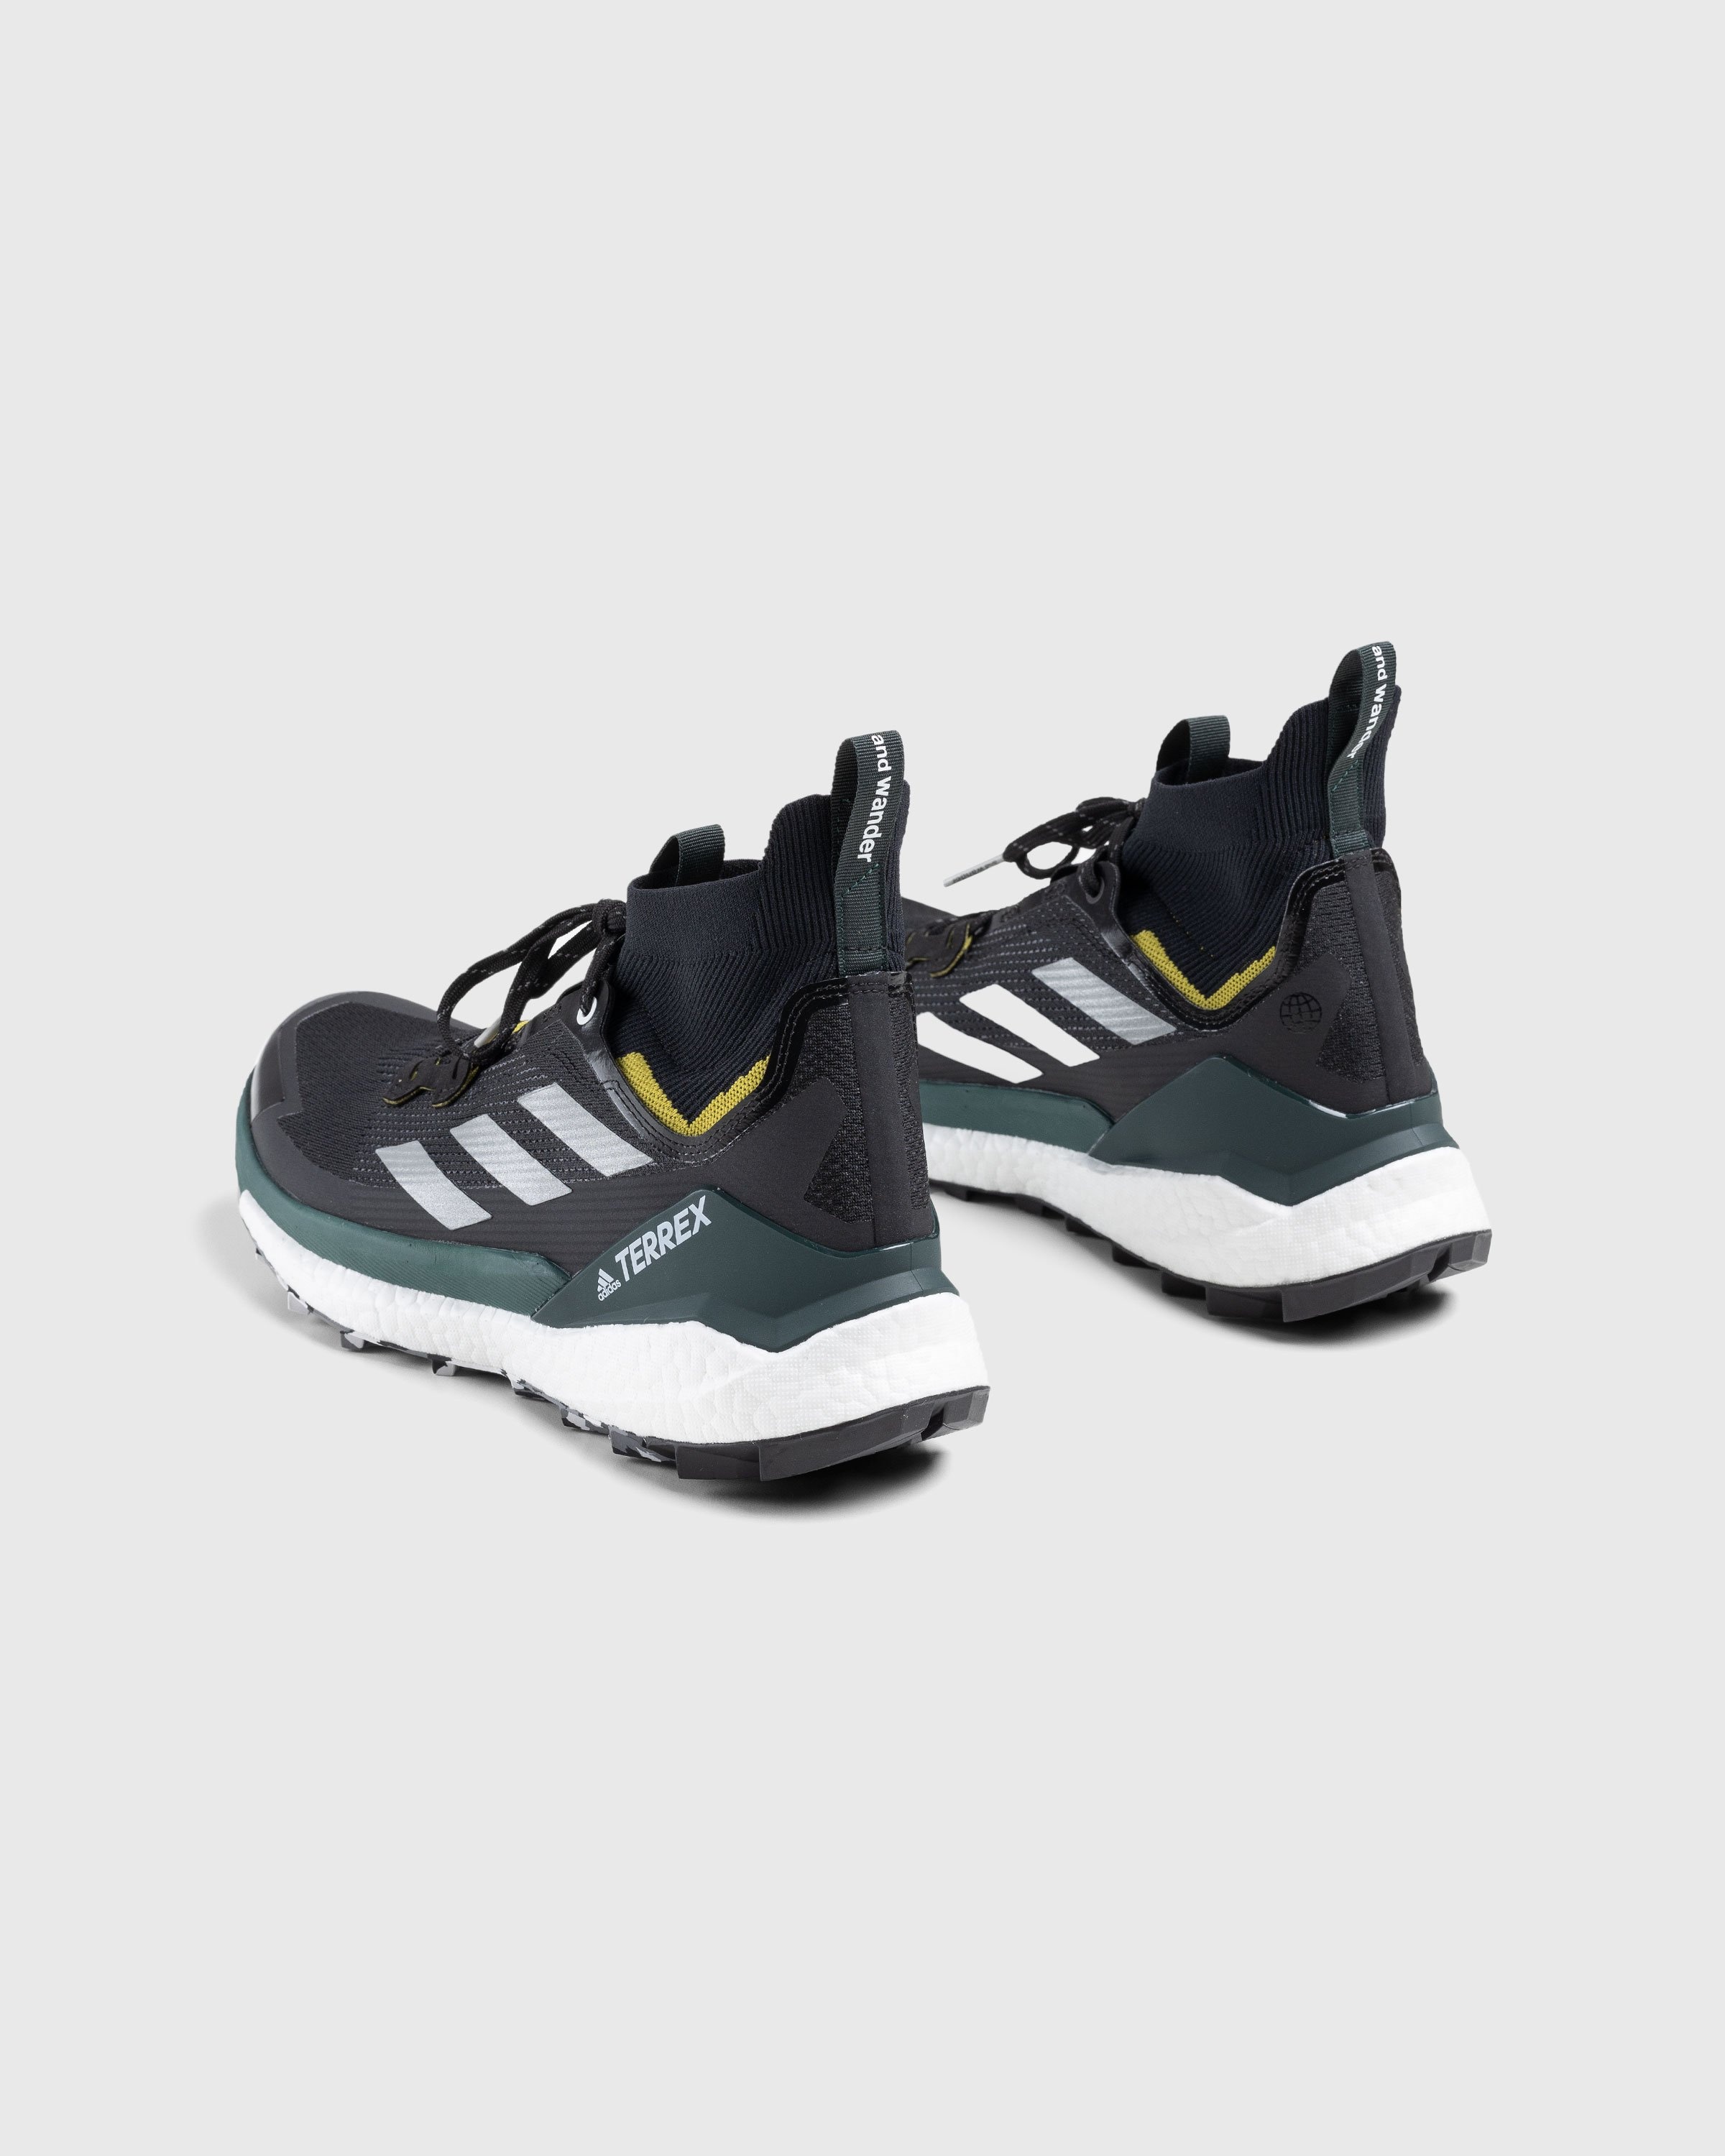 Adidas x And Wander – TERREX Free Hiker 2 Black/Silver/Olive - High Top Sneakers - Black - Image 4